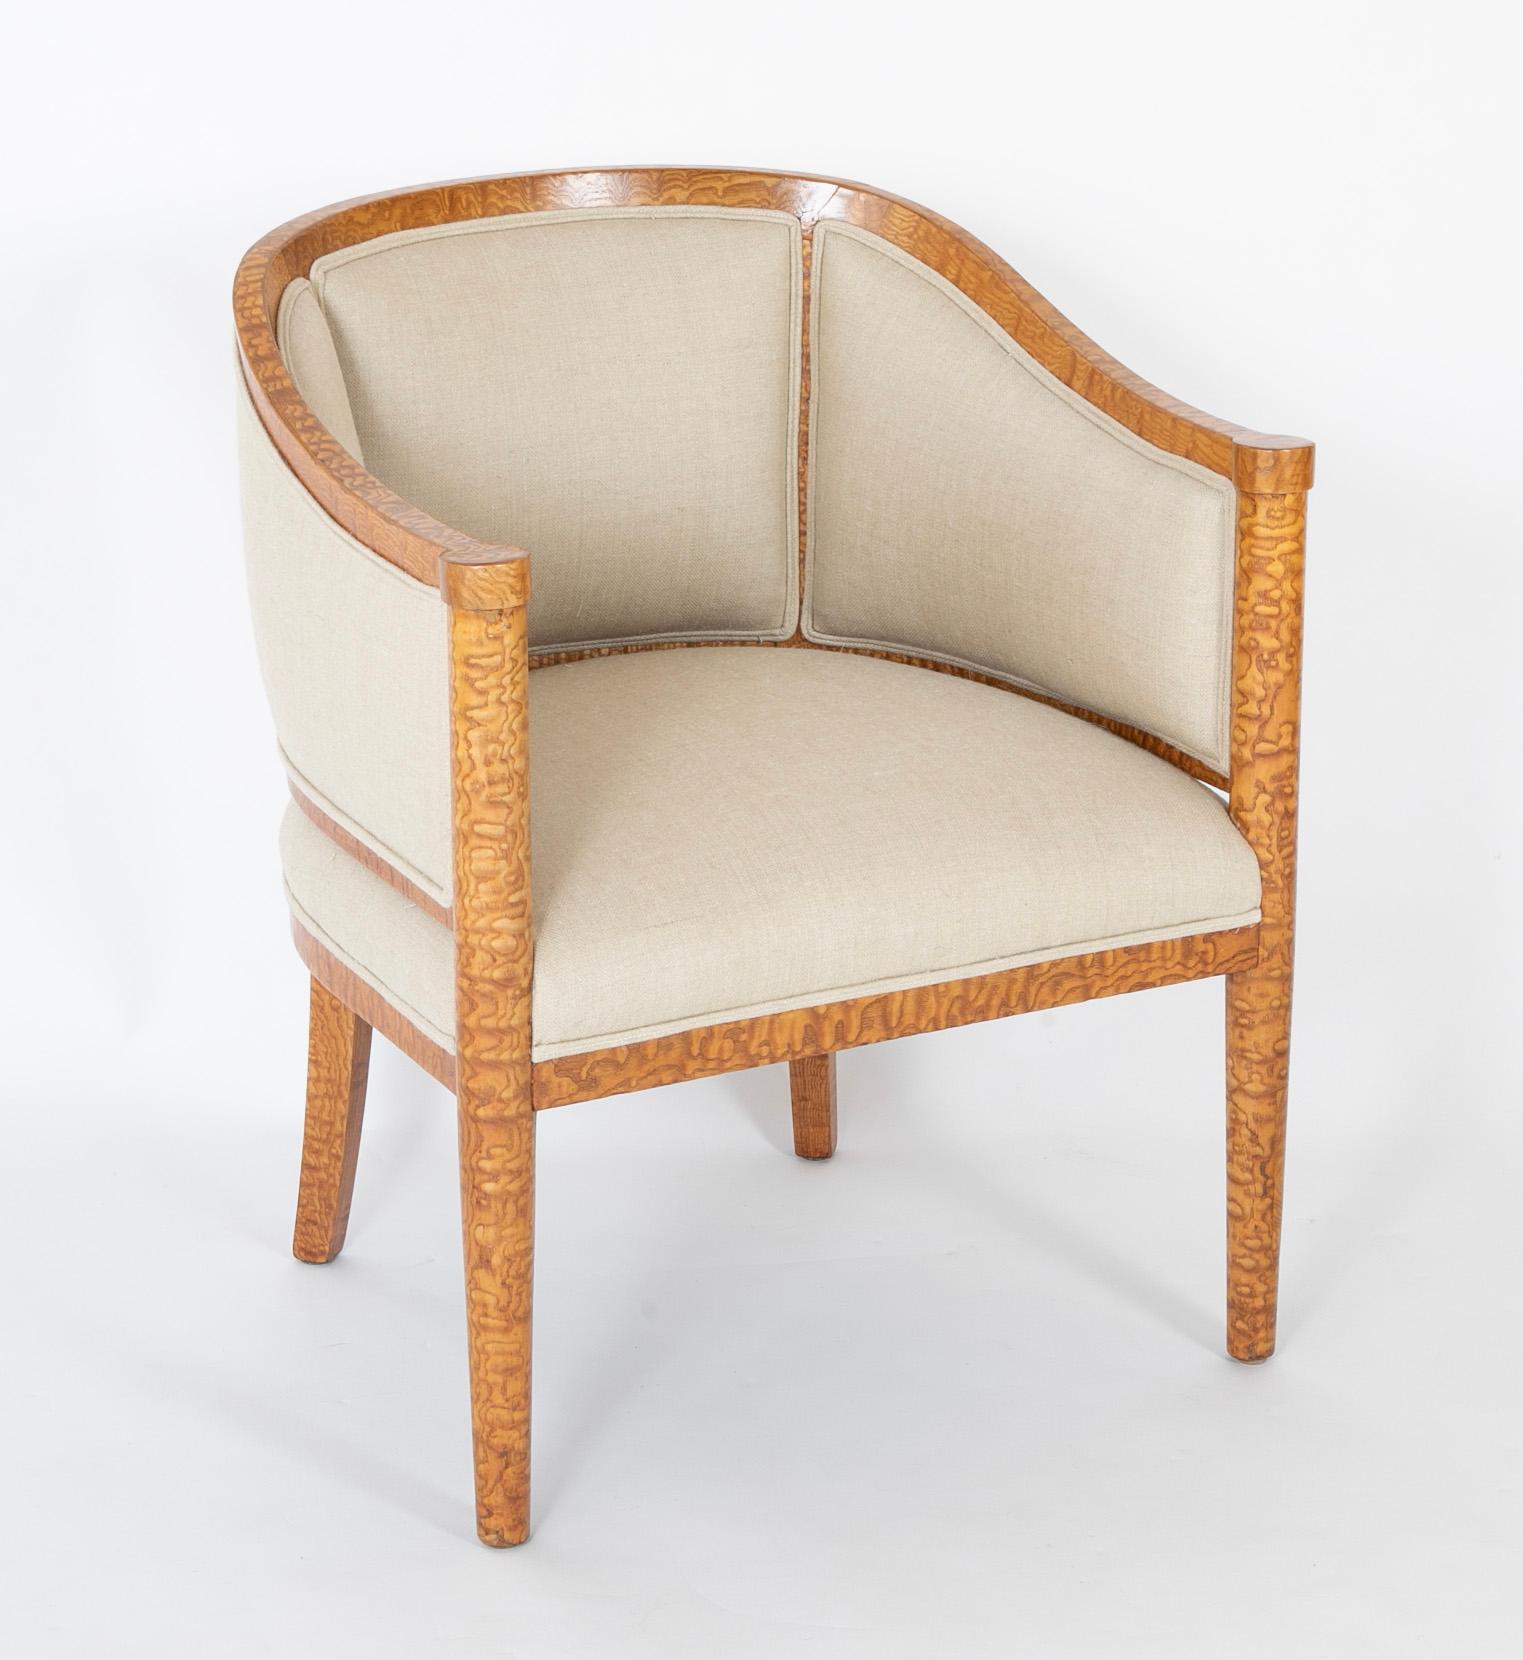 20th century Baltic bergere in burr ash with upholstered seat, back and arms.  